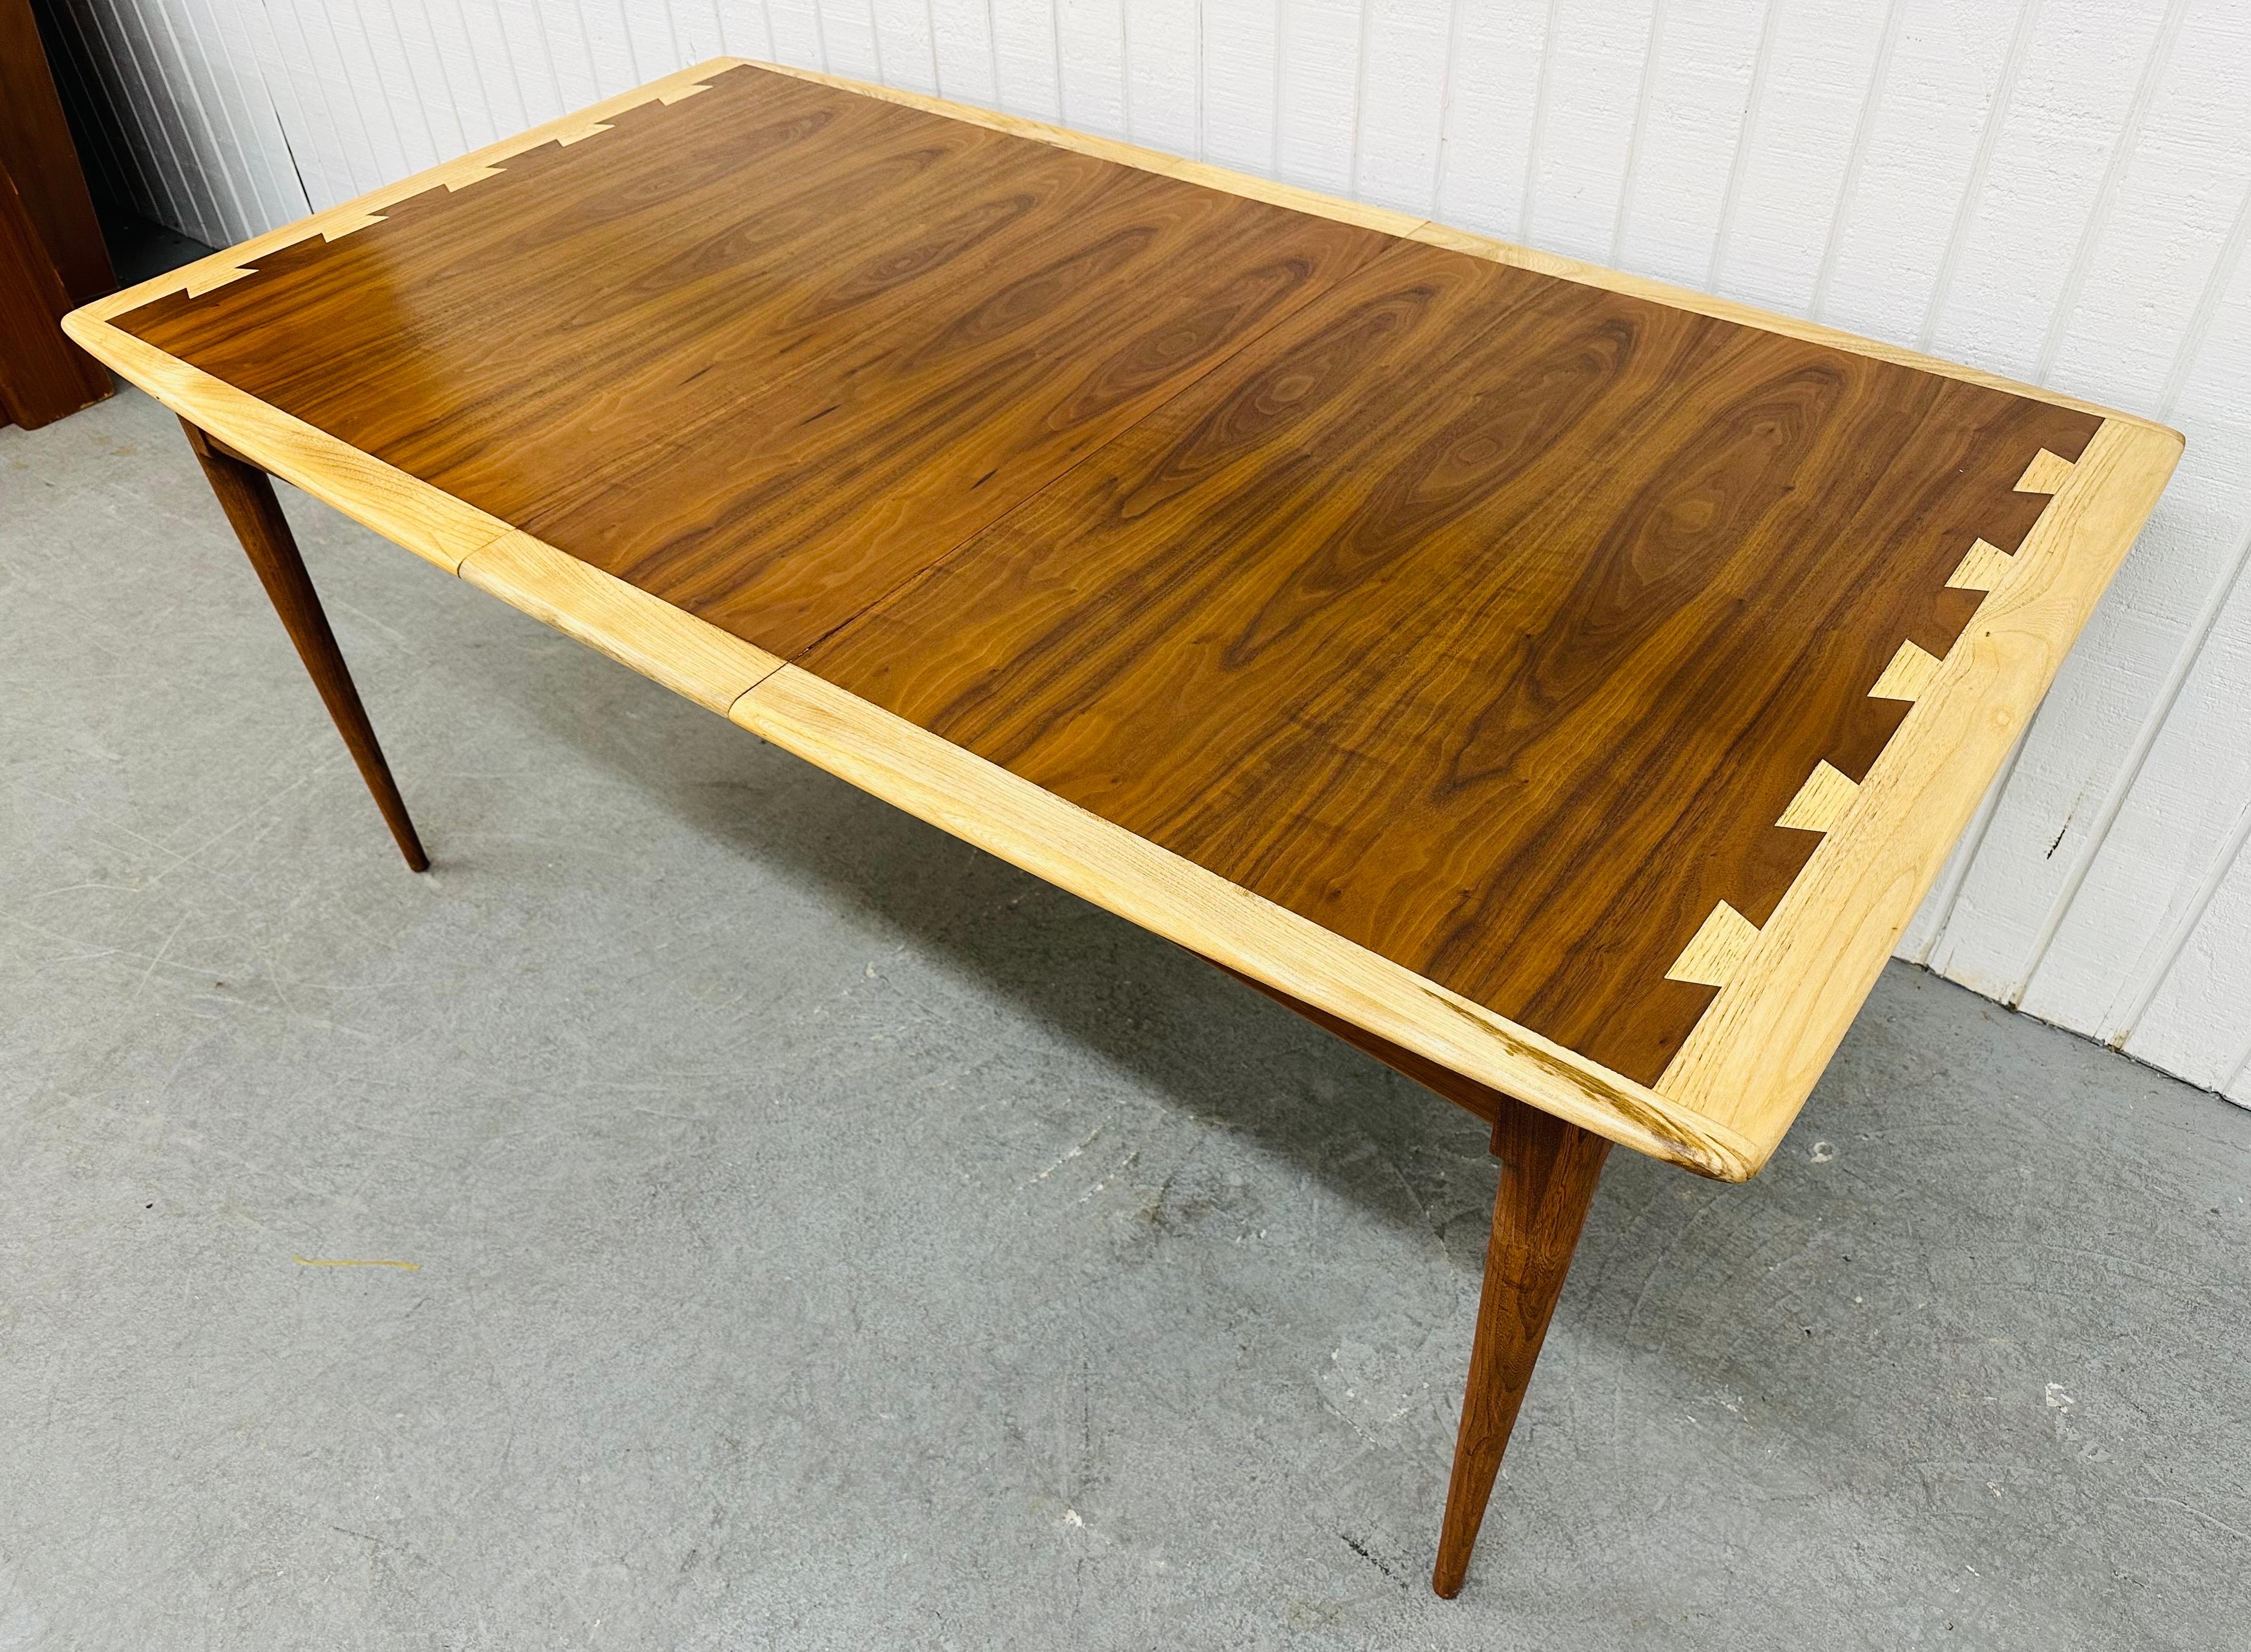 This listing is for a Mid-Century Modern Lane Acclaimed Walnut Dining Table. Featuring a rectangular top, four removable modern legs, one leaf to extend the table up to 68” L, the iconic Lane Acclaimed dovetailed top, and a beautiful walnut finish.